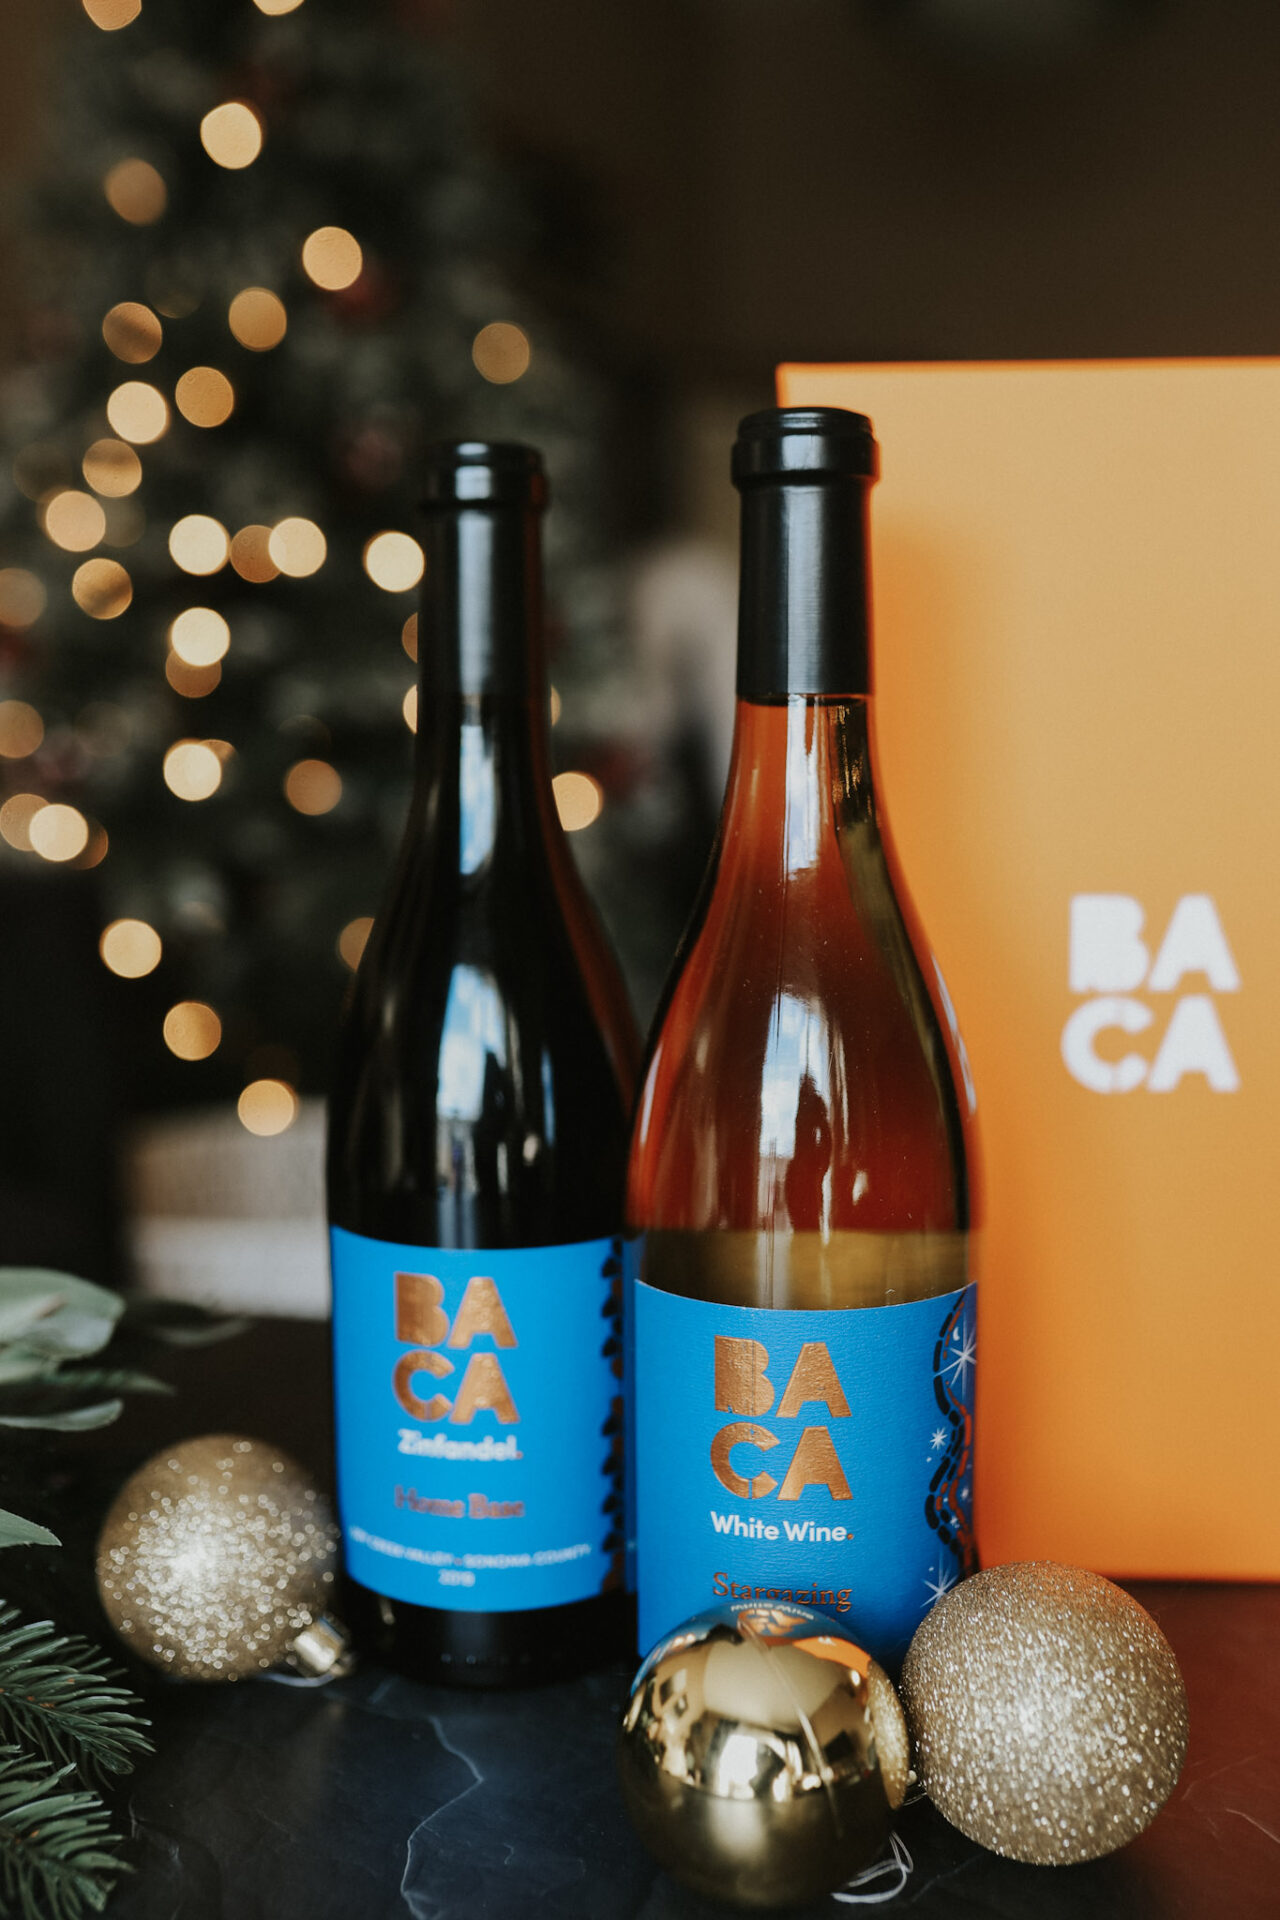 BACA wine gift set with two wines - zinfandel and a white blend